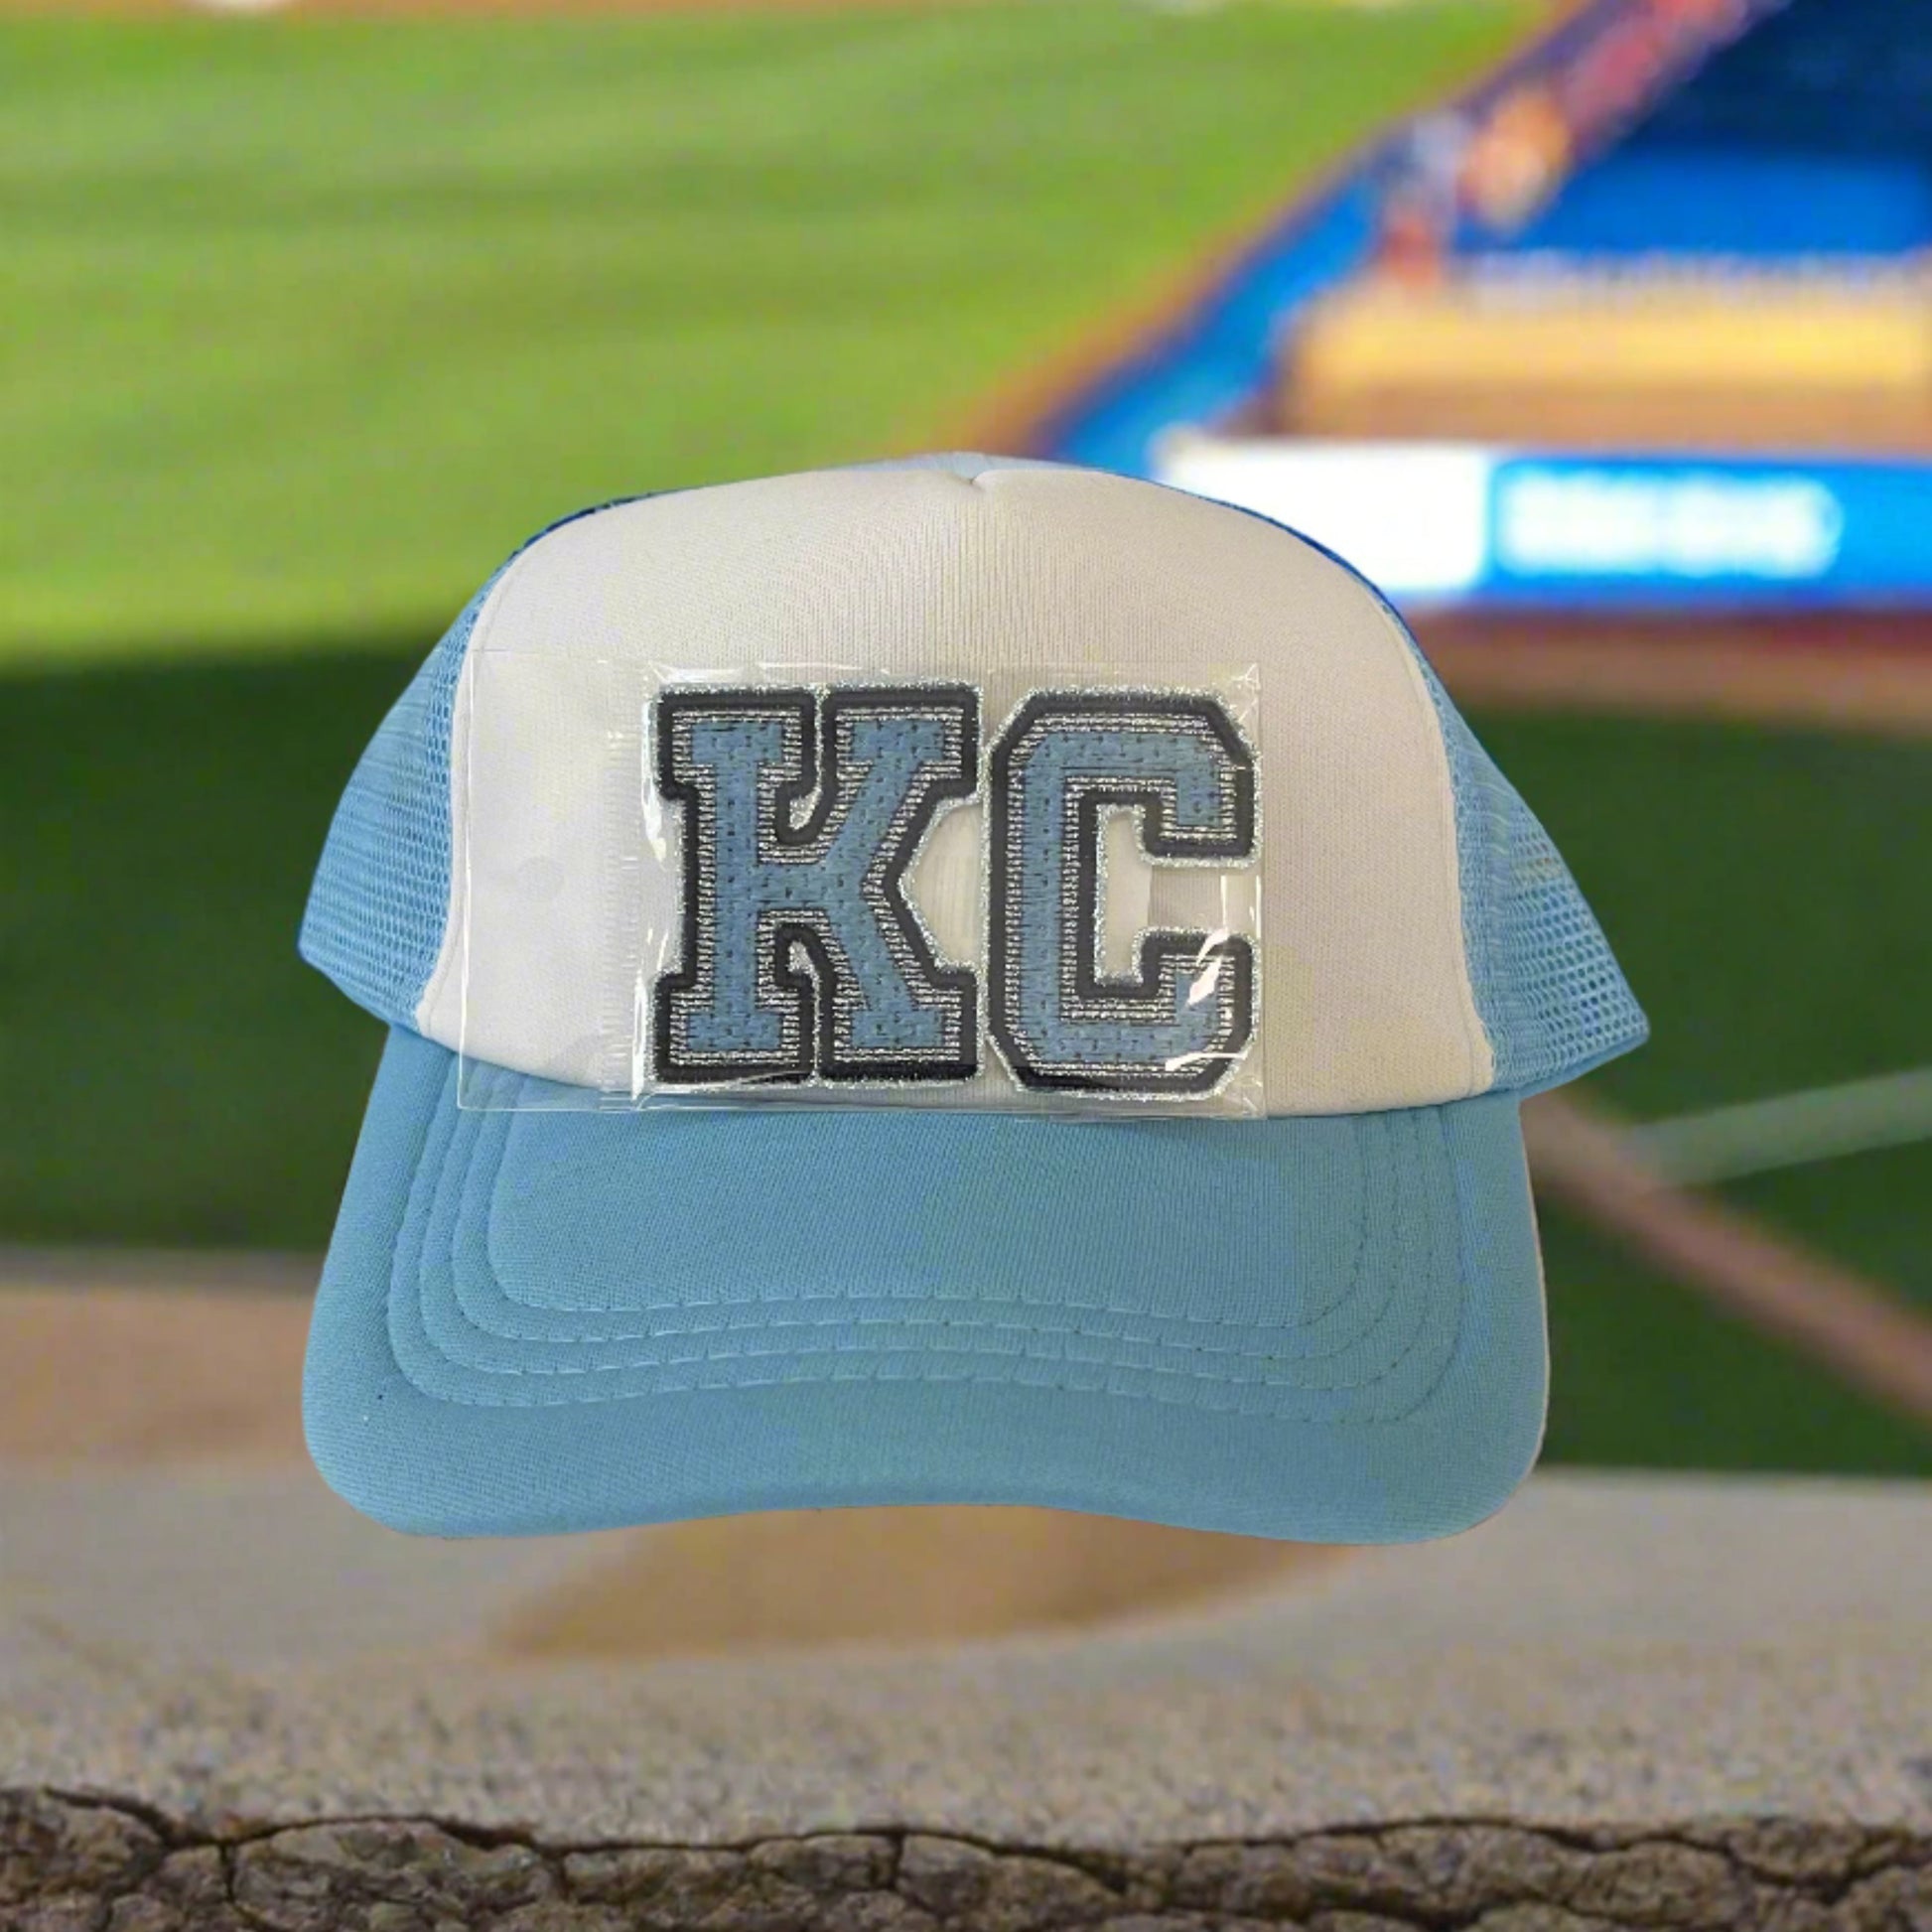 Iron-on patch featuring bold "KC" letters in Kansas City Royals and Sporting KC colors, showcasing a stylish and vibrant aesthetic.